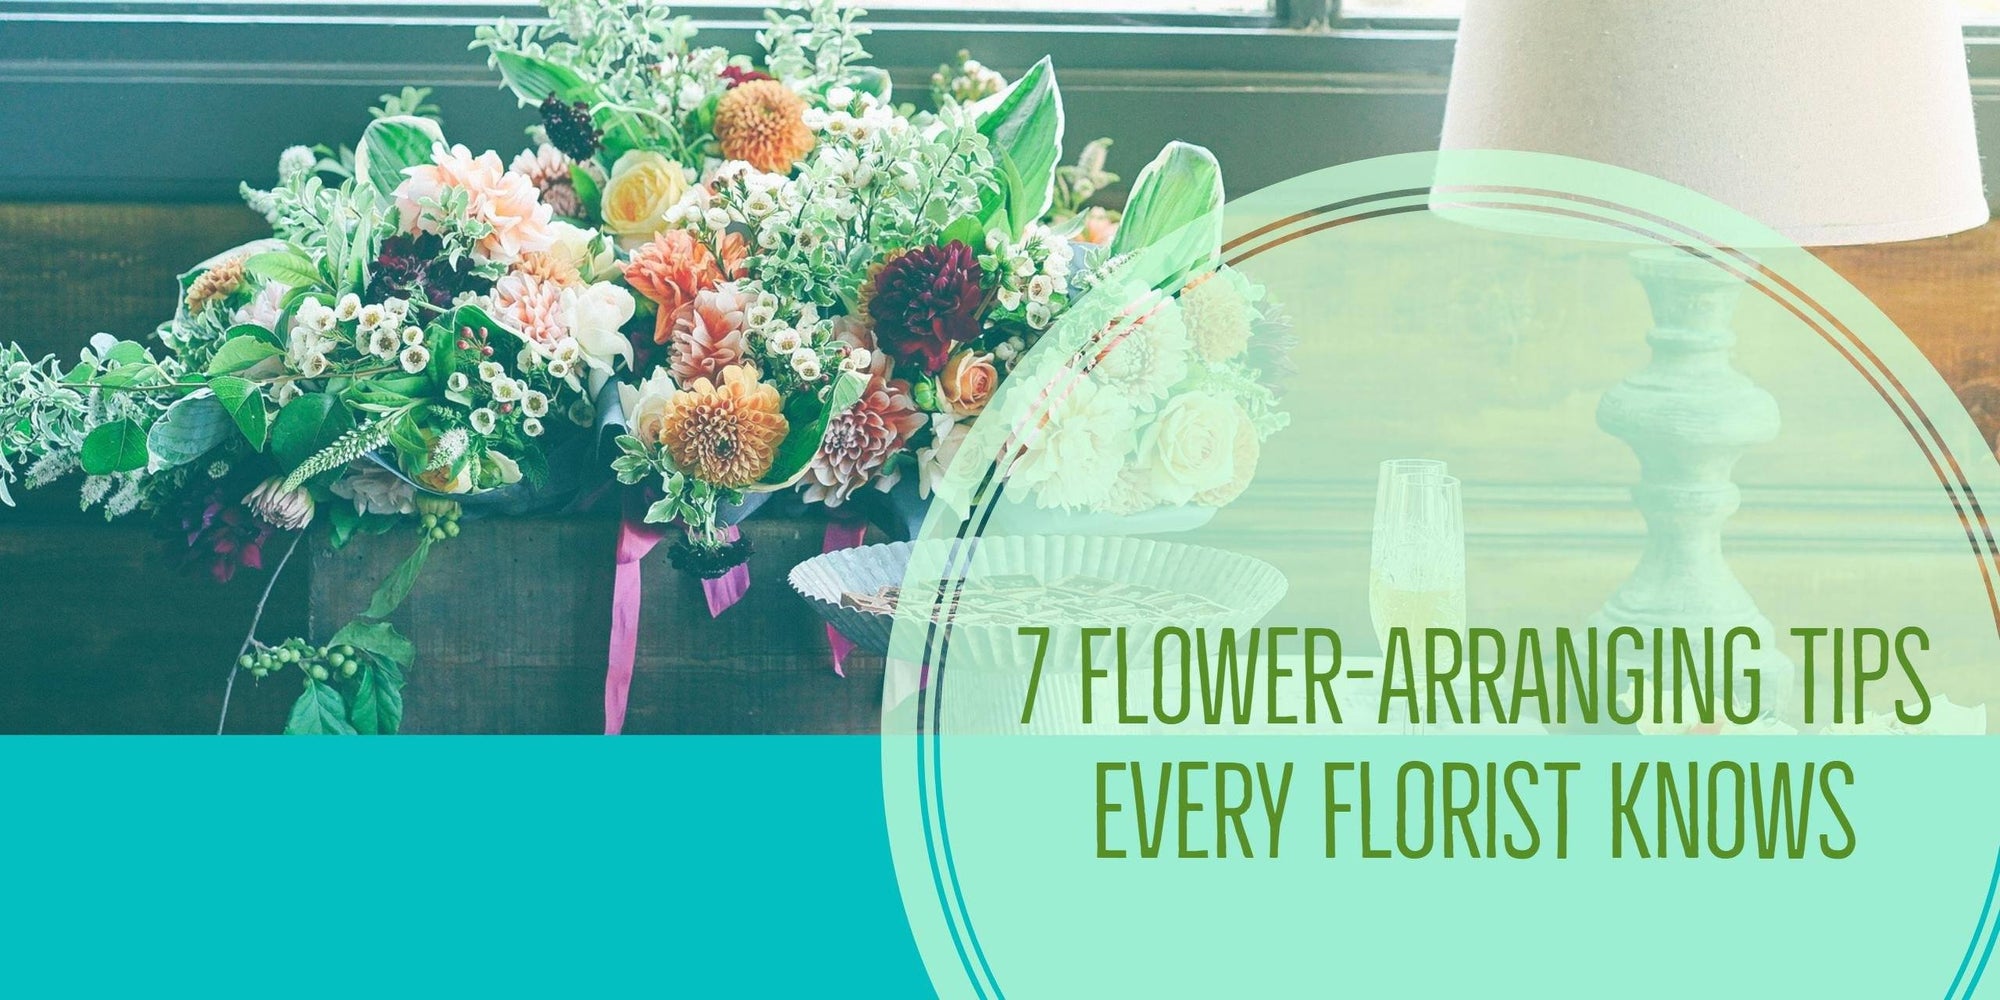 7 Flower-Arranging Tips Your Florist Doesn't Want You to Know